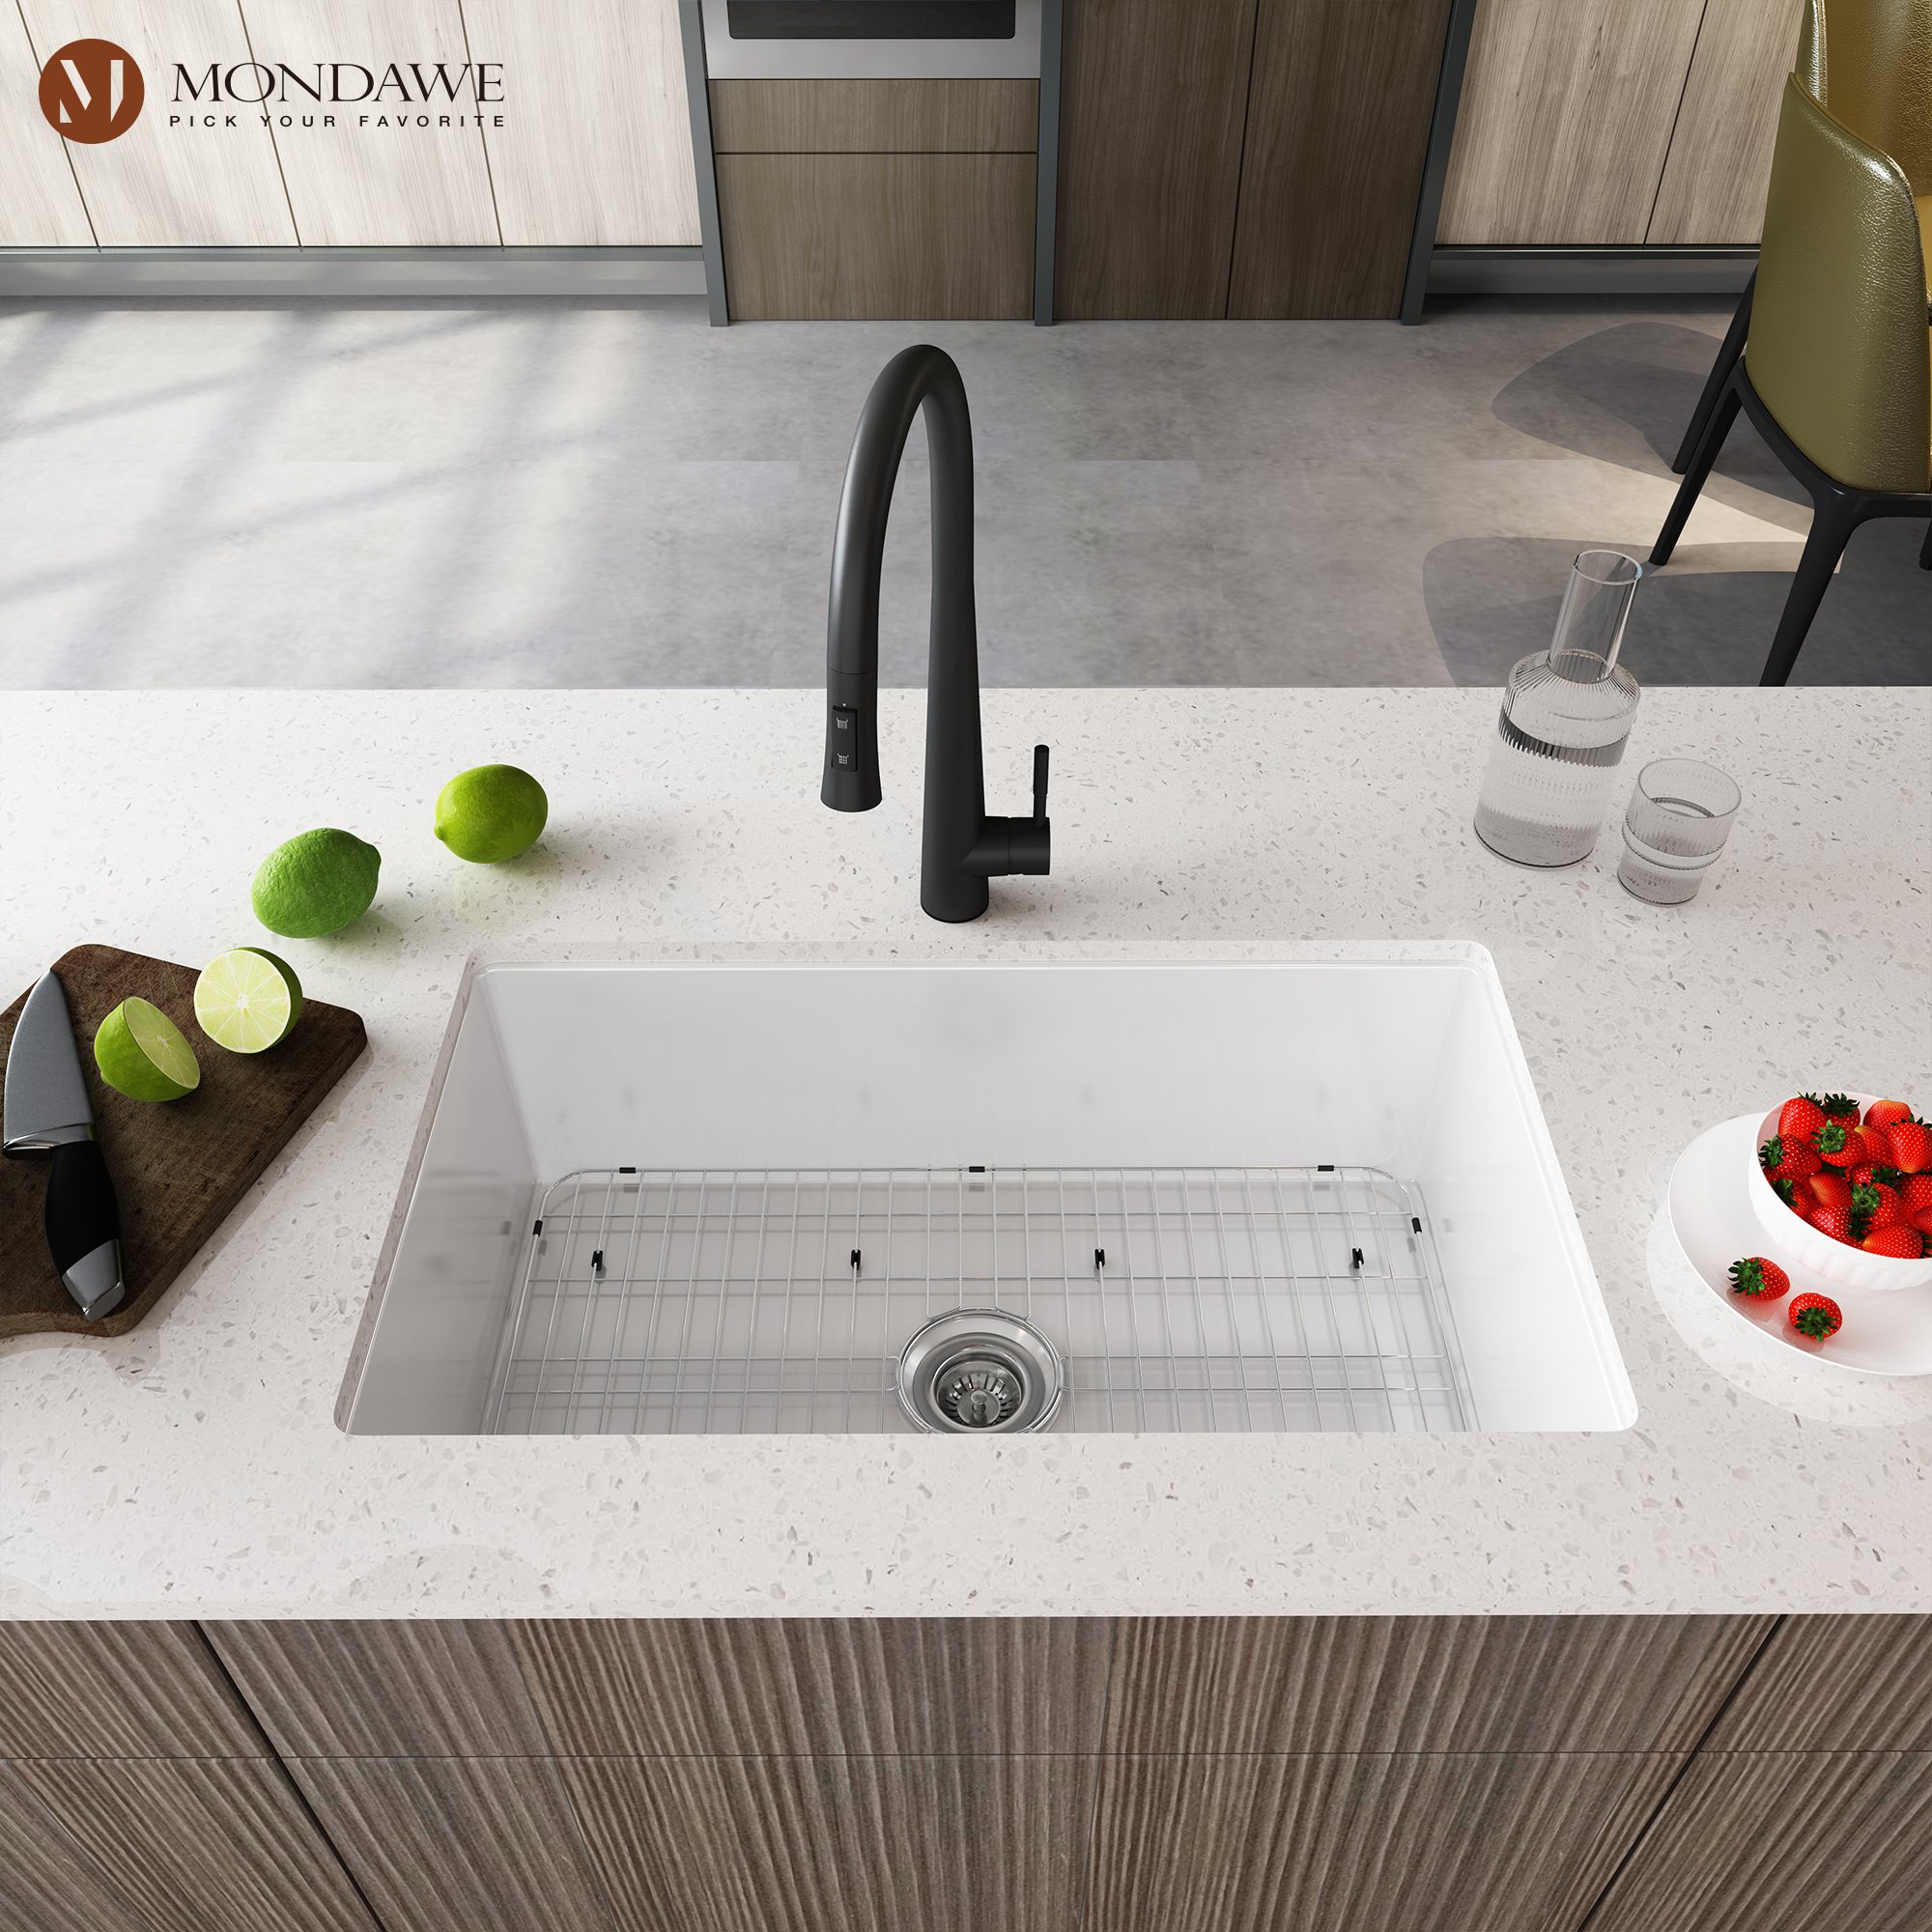 Undermount 32 in. single bowl fireclay kitchen sink in white comes with pull-down faucet-Mondawe